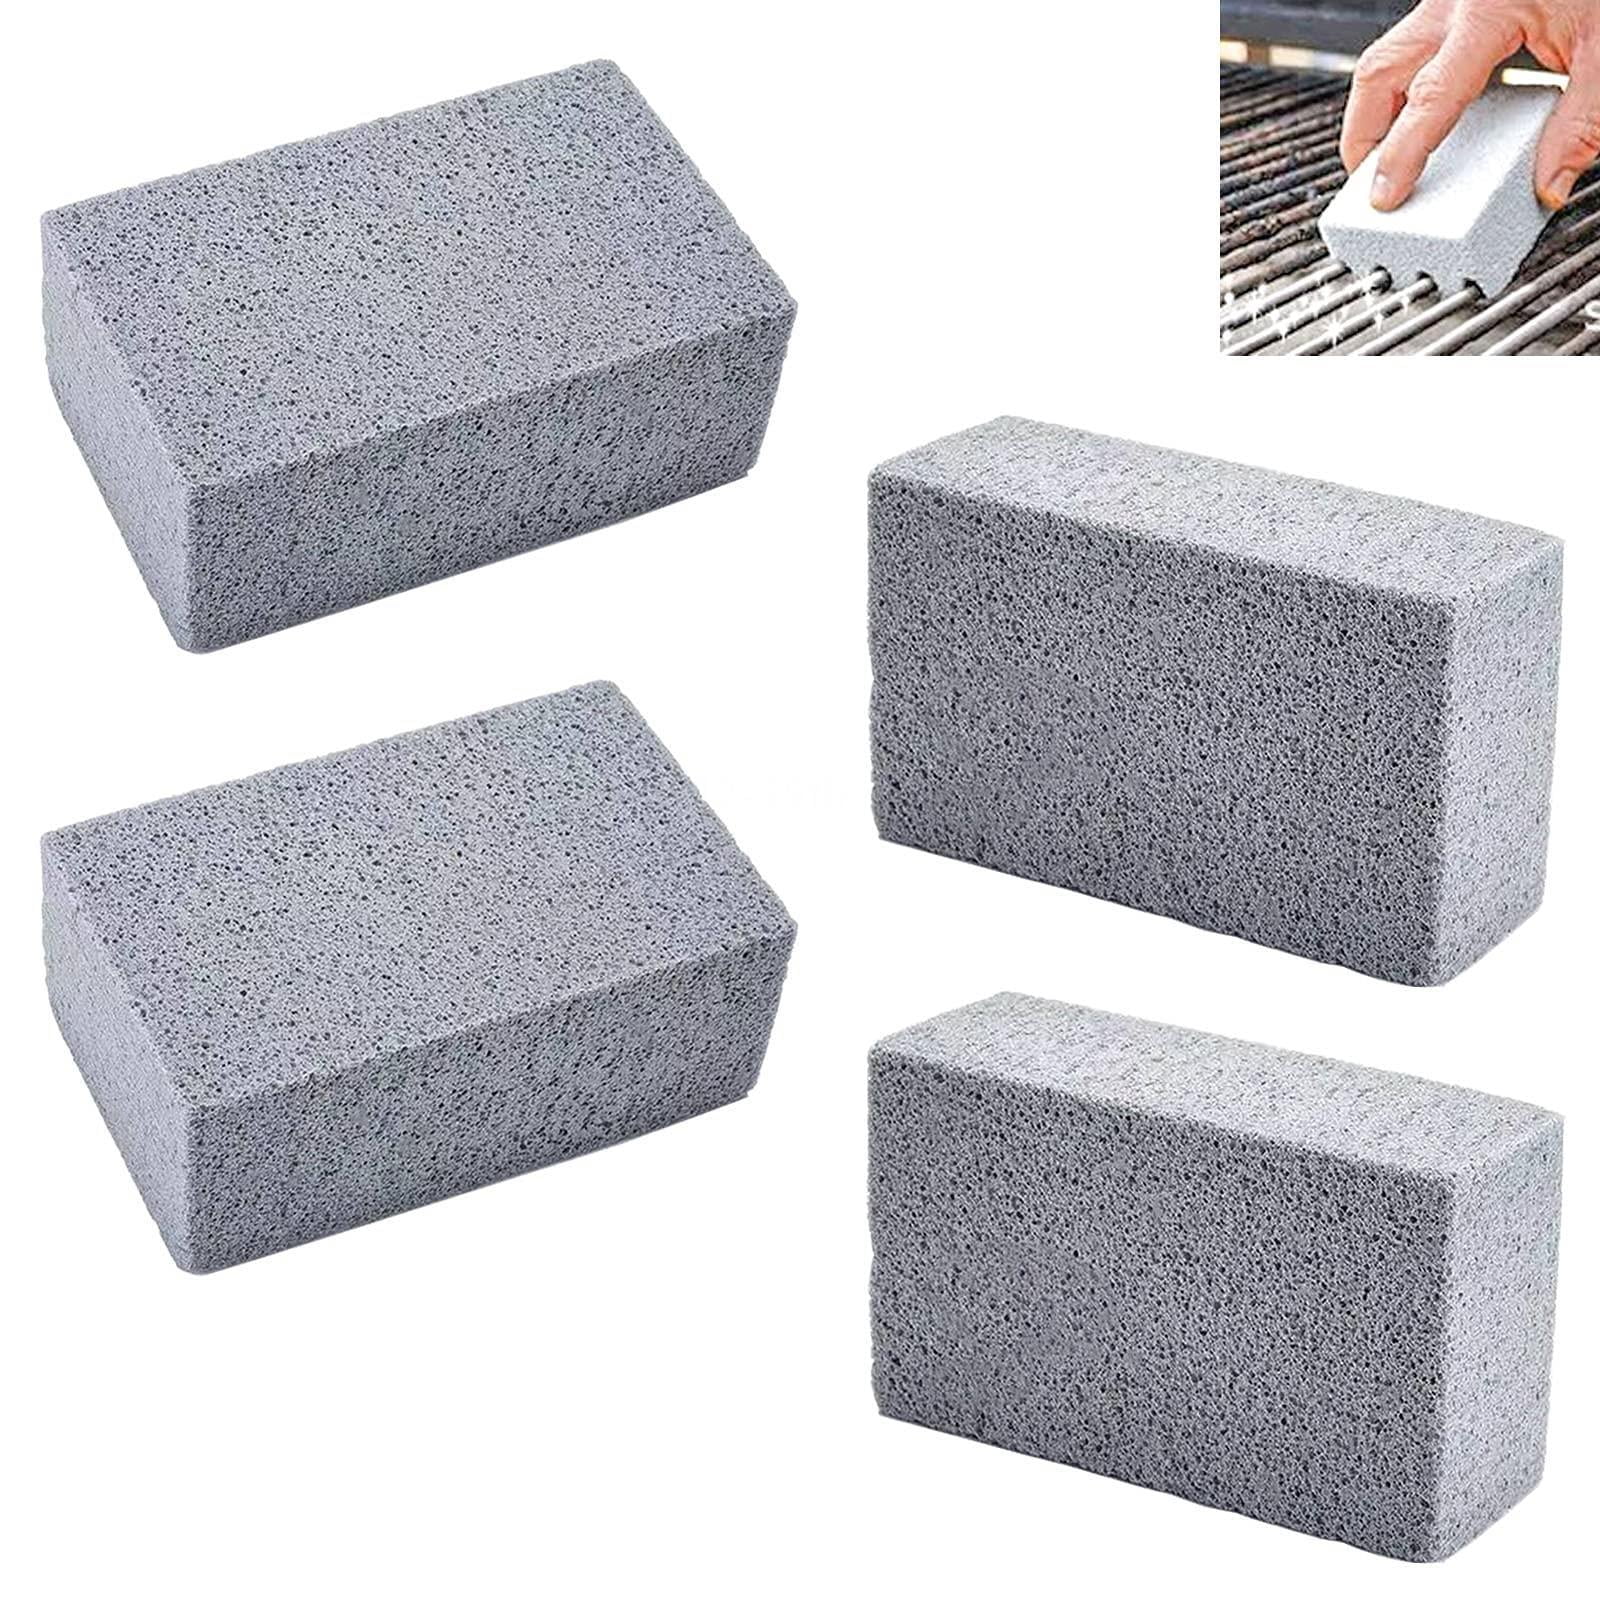 Heavy Duty Grill Cleaning Brick 1 Pack Commercial Grade Pumice Stone Tool Cl... 